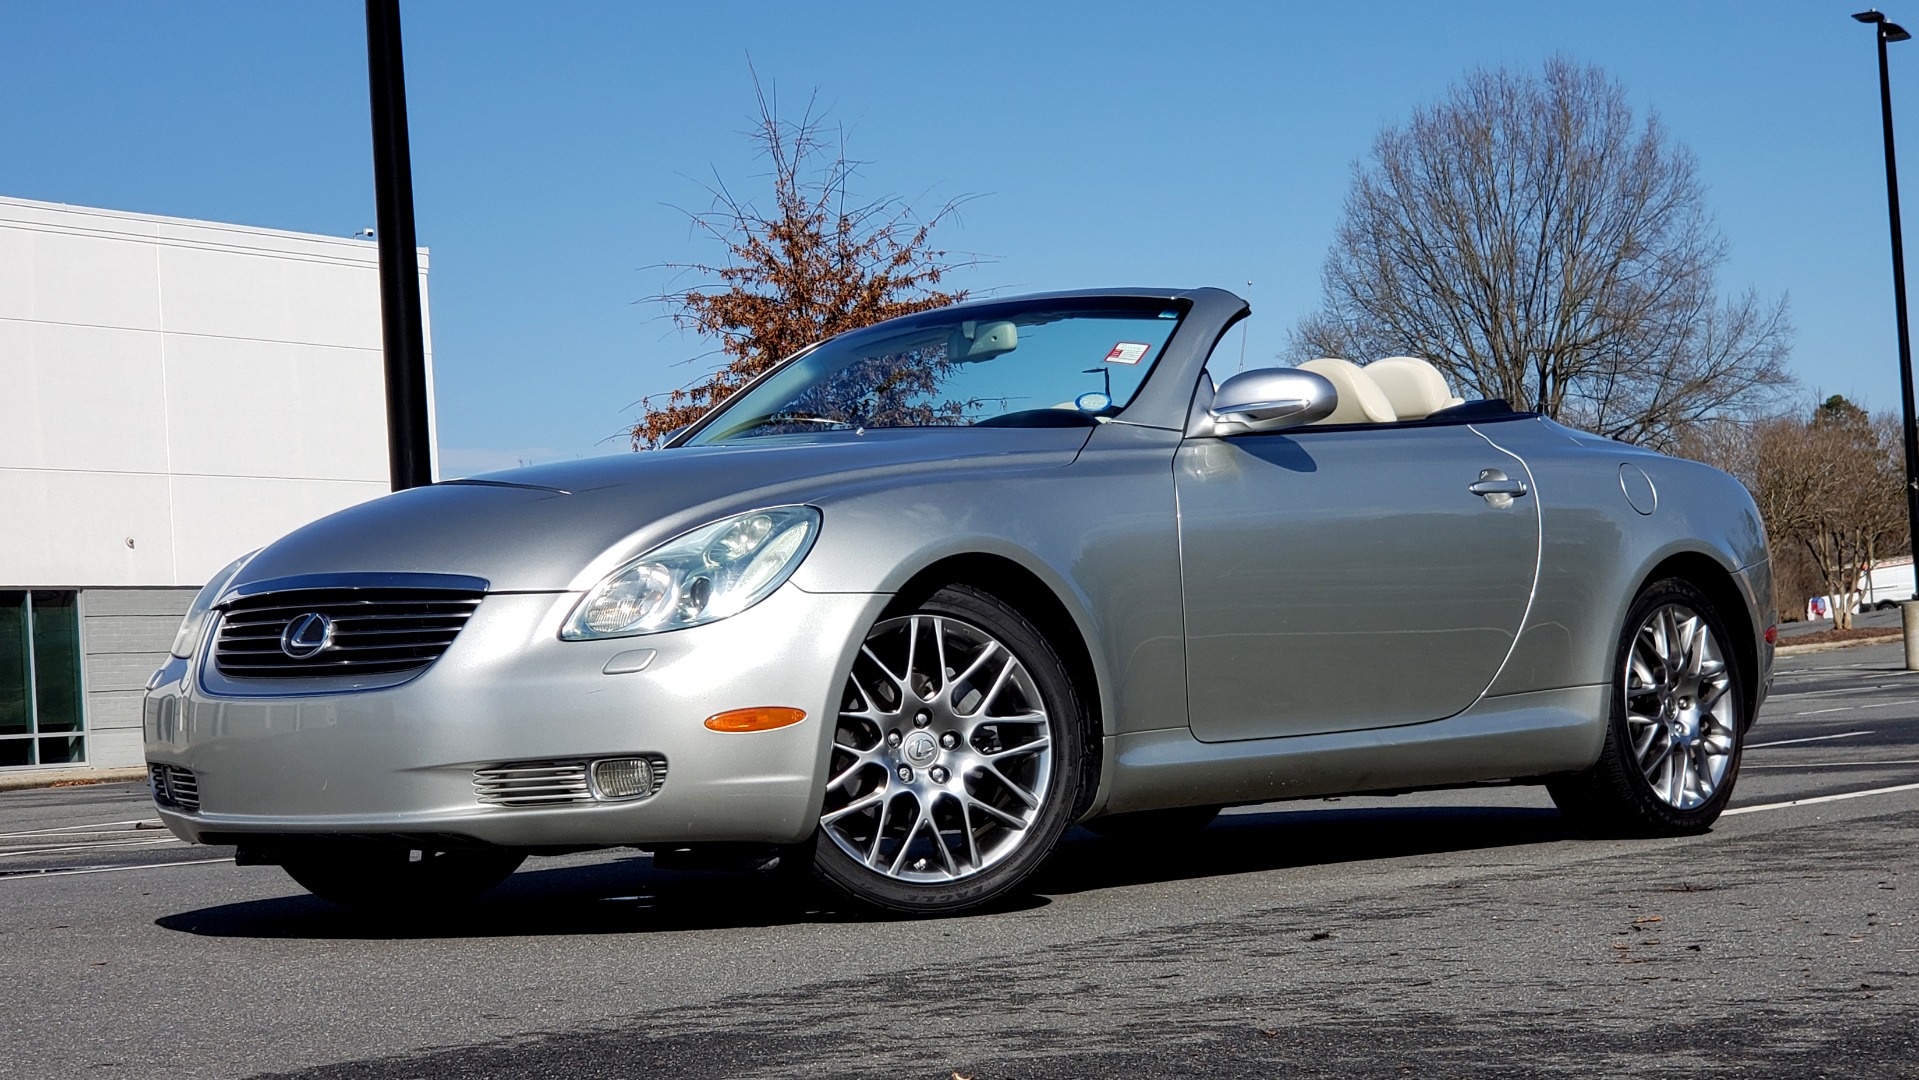 Used 2004 Lexus SC 430 CONVERTIBLE / 4.3L V8 / 5-SPD AUTO / MARK LEVINSON /  18IN WHEELS For Sale ($13,995) | Formula Imports Stock #FC10936